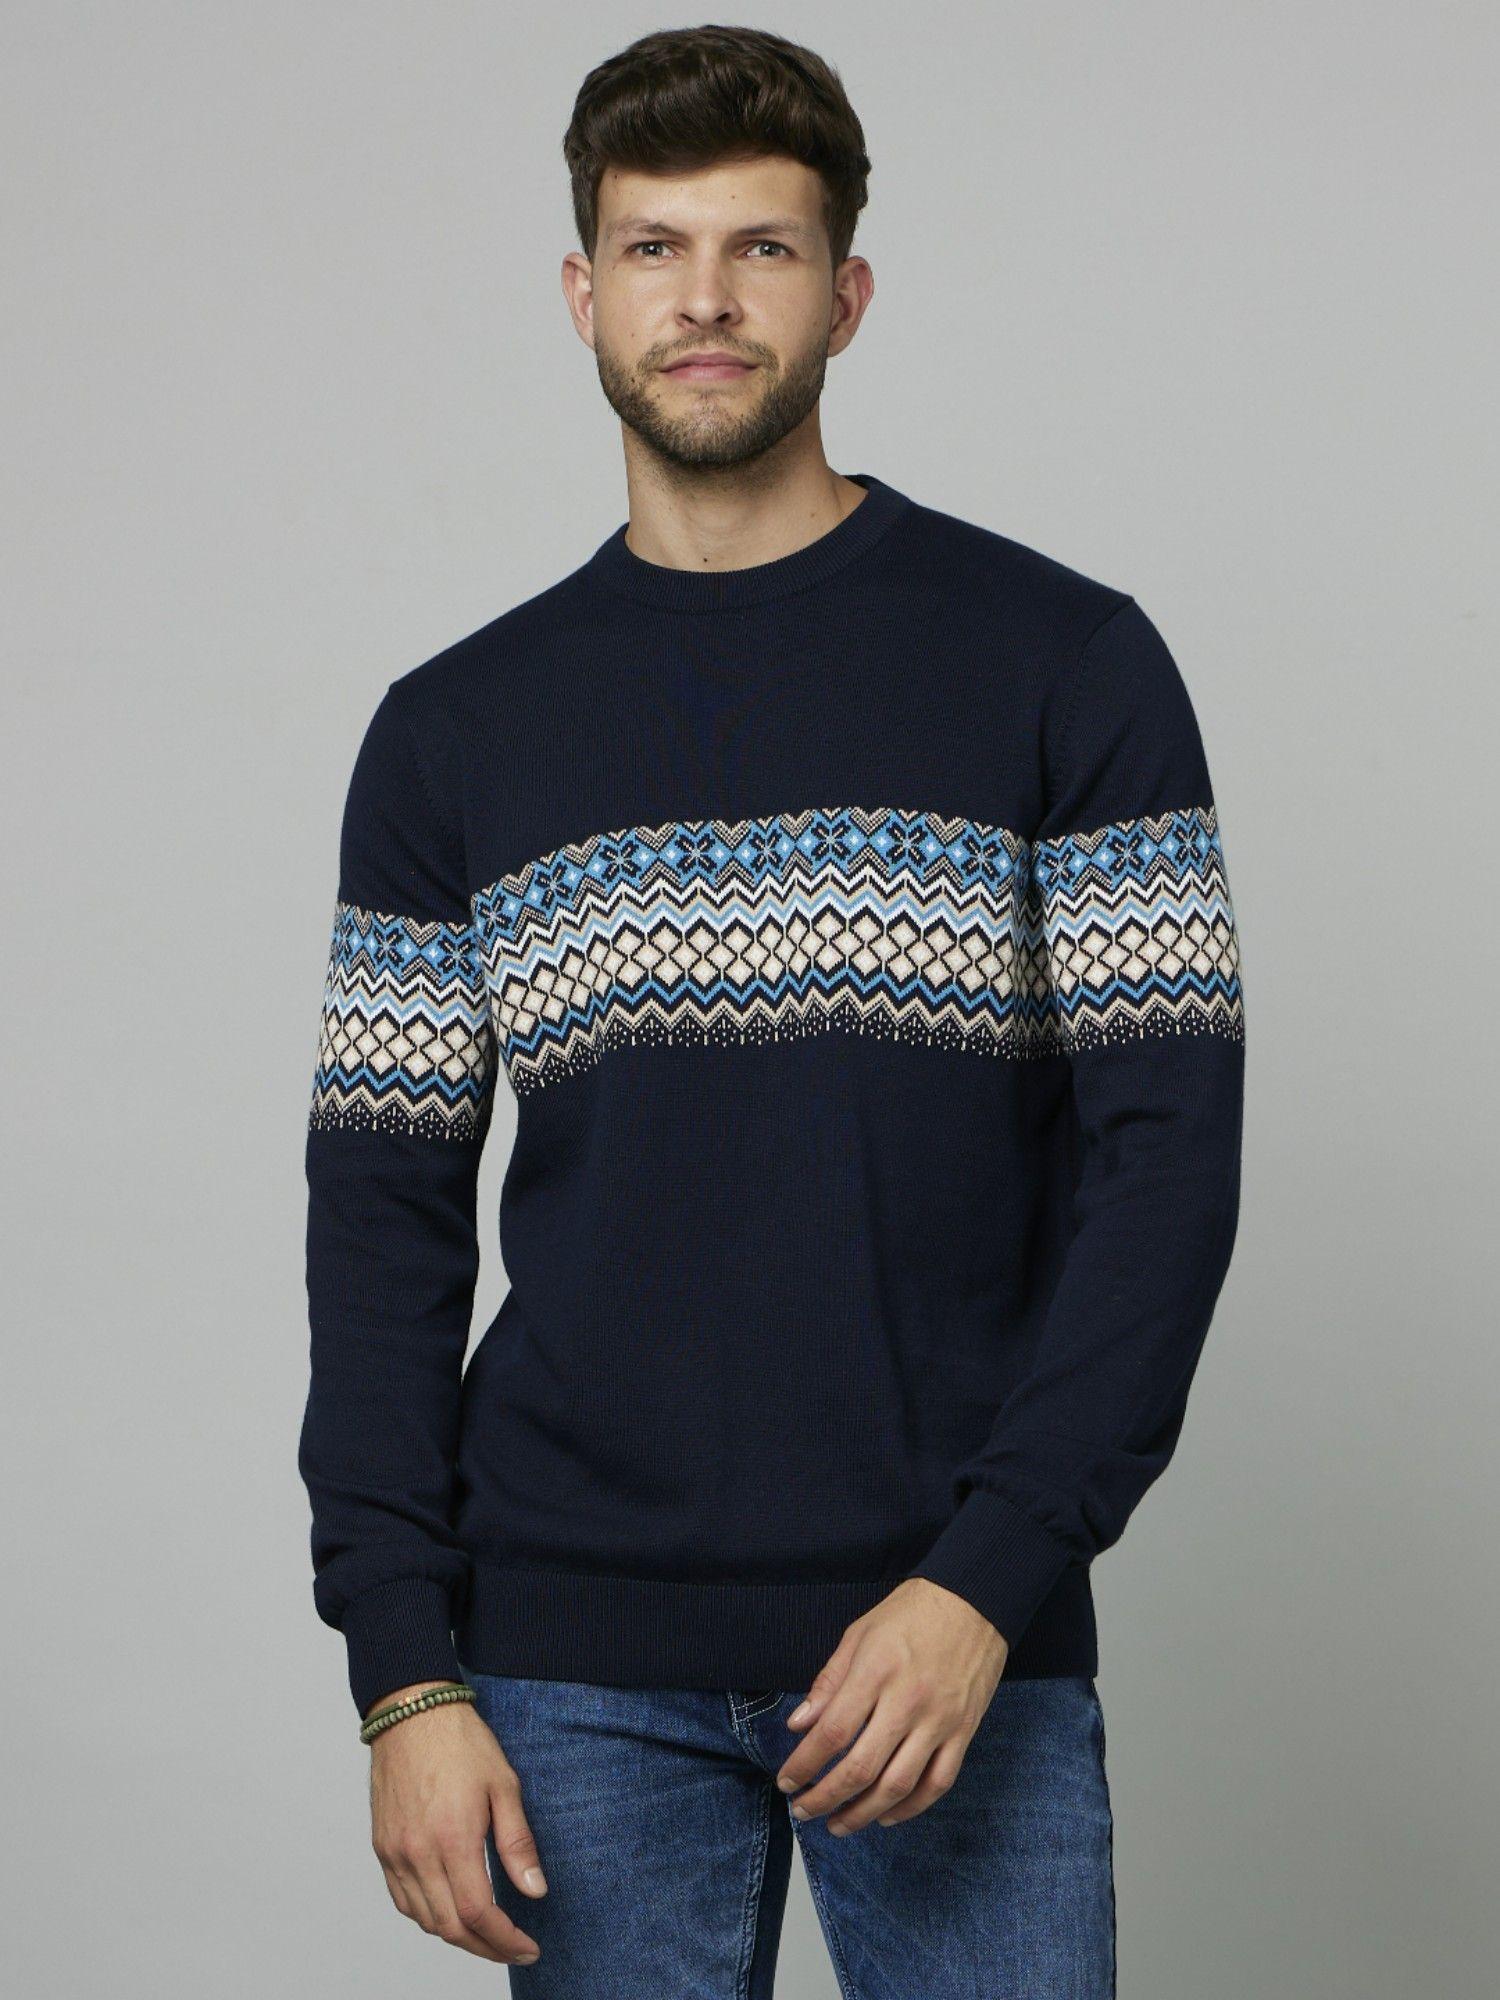 printed-navy-blue-long-sleeves-round-neck-structured-sweater